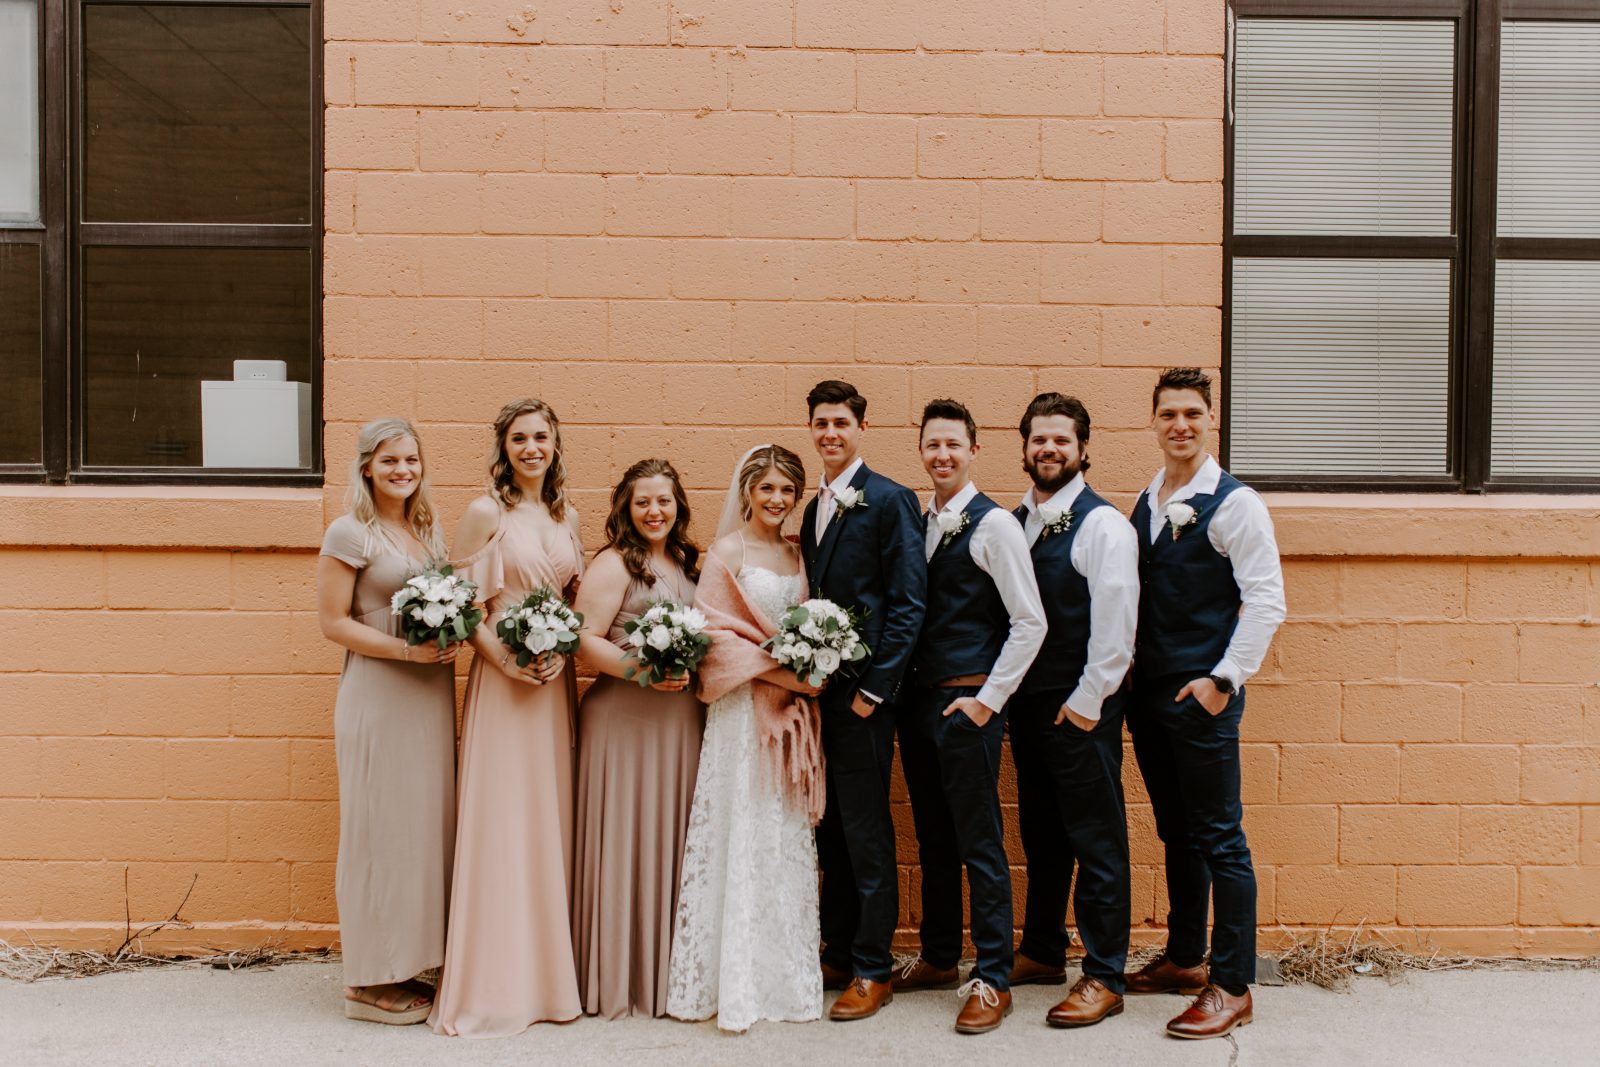 Becca and Tanner Wedding Party Olive Branch Events Co.